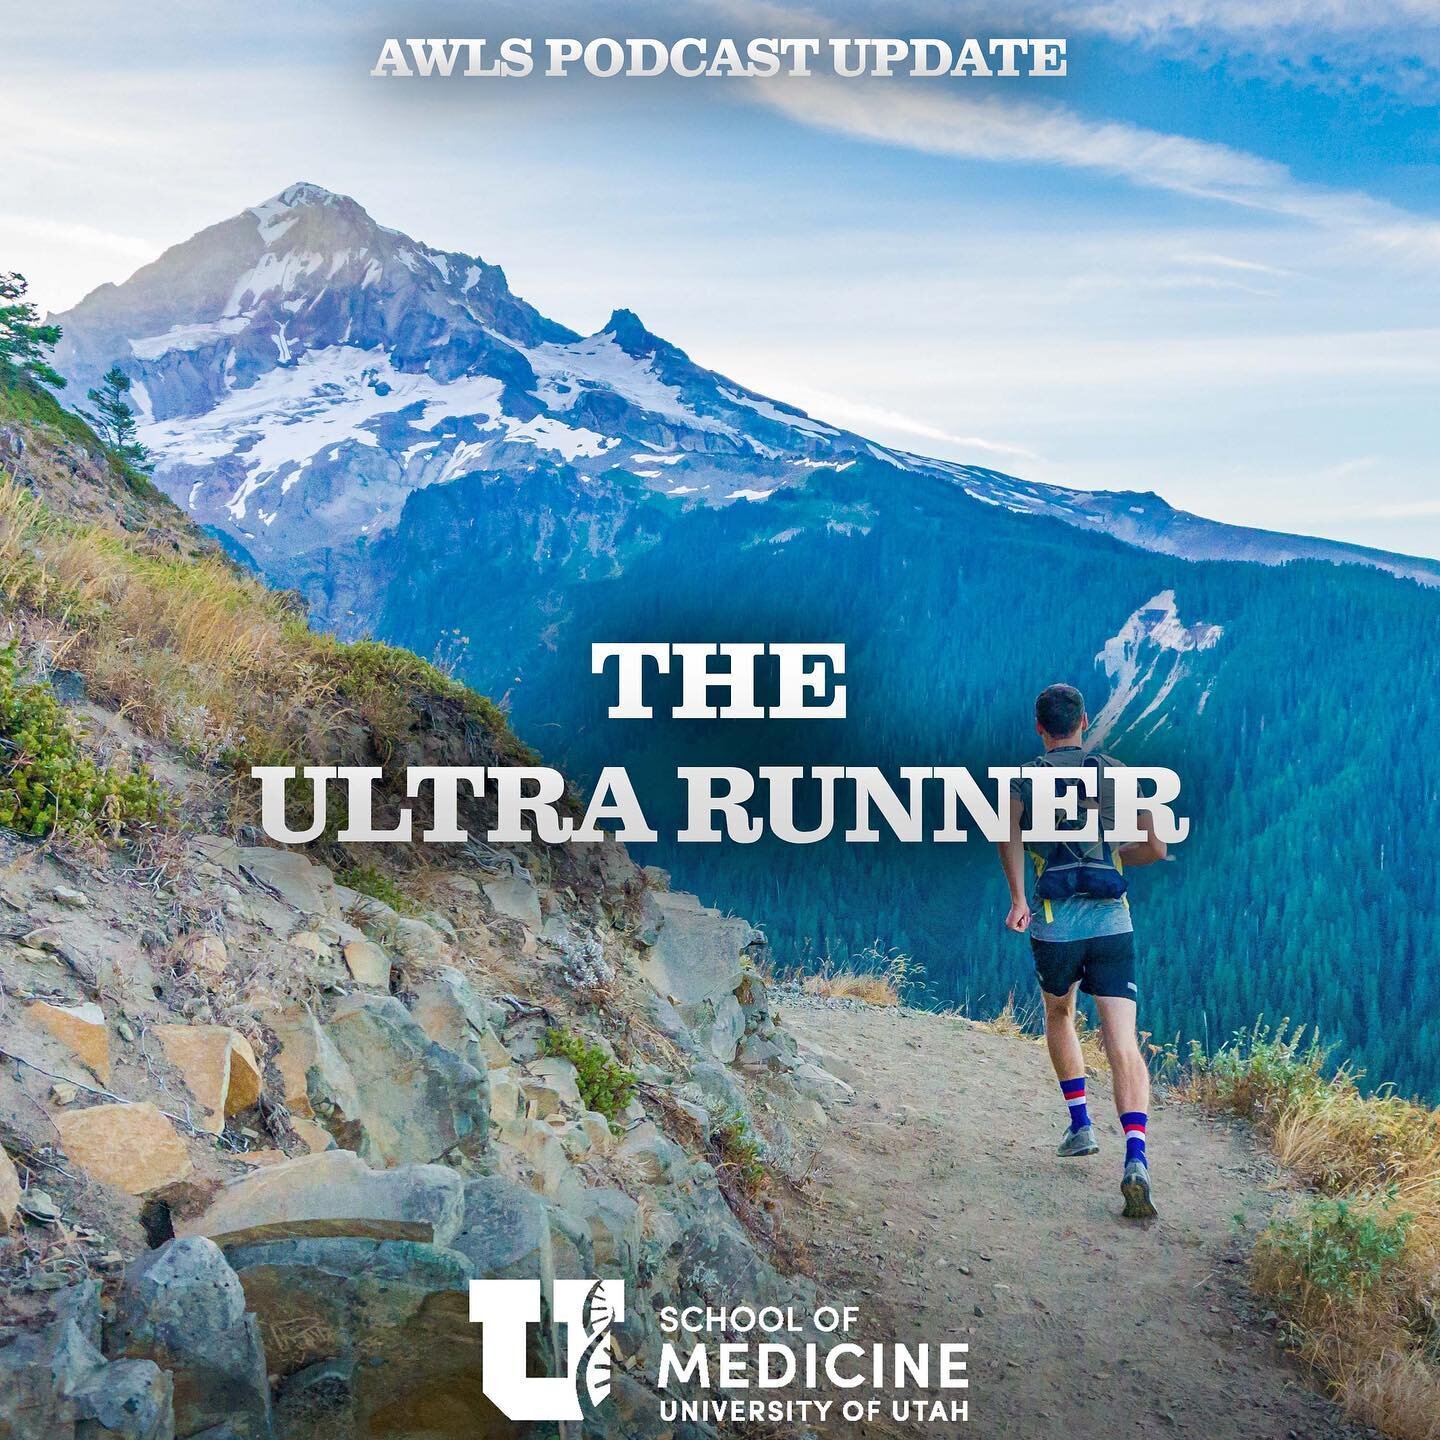 What does it take to run one of these incredibly long and difficult ultramarathons?&nbsp; What do you eat? What shoes do you wear? And what does it take to complete one?&nbsp; Listen as ultramarathoner Magnus Tveit inspires us.

Listen to our AWLS po